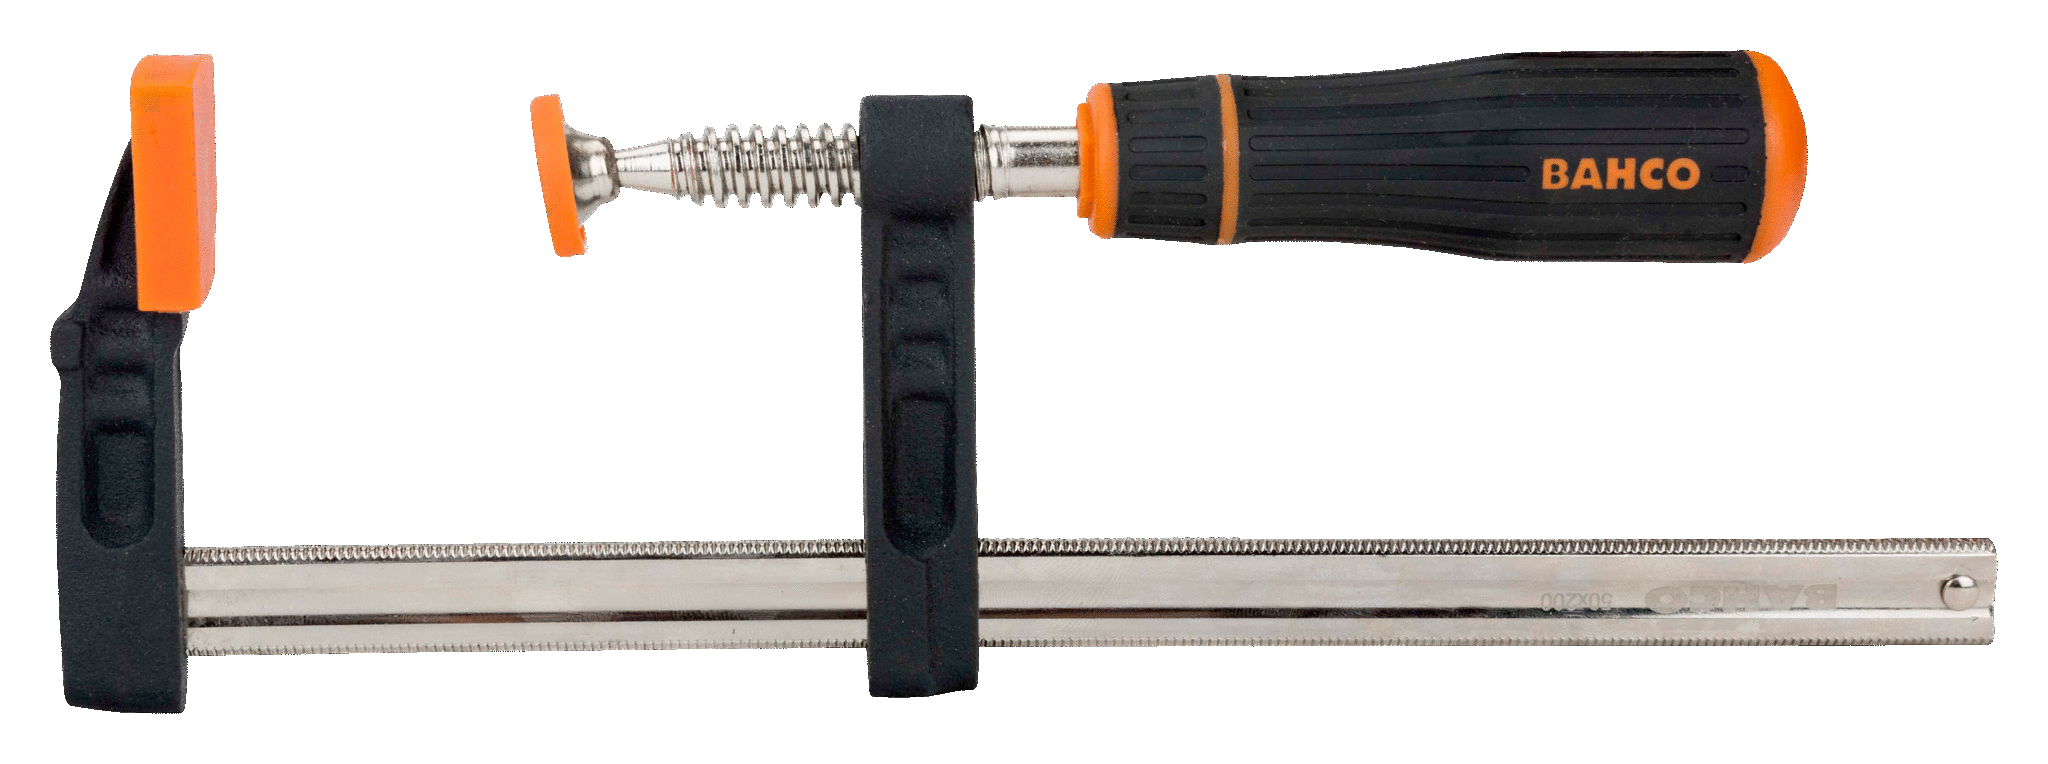 F-Clamps with Rubberised Handle - 420SH-100-200 by Bahco